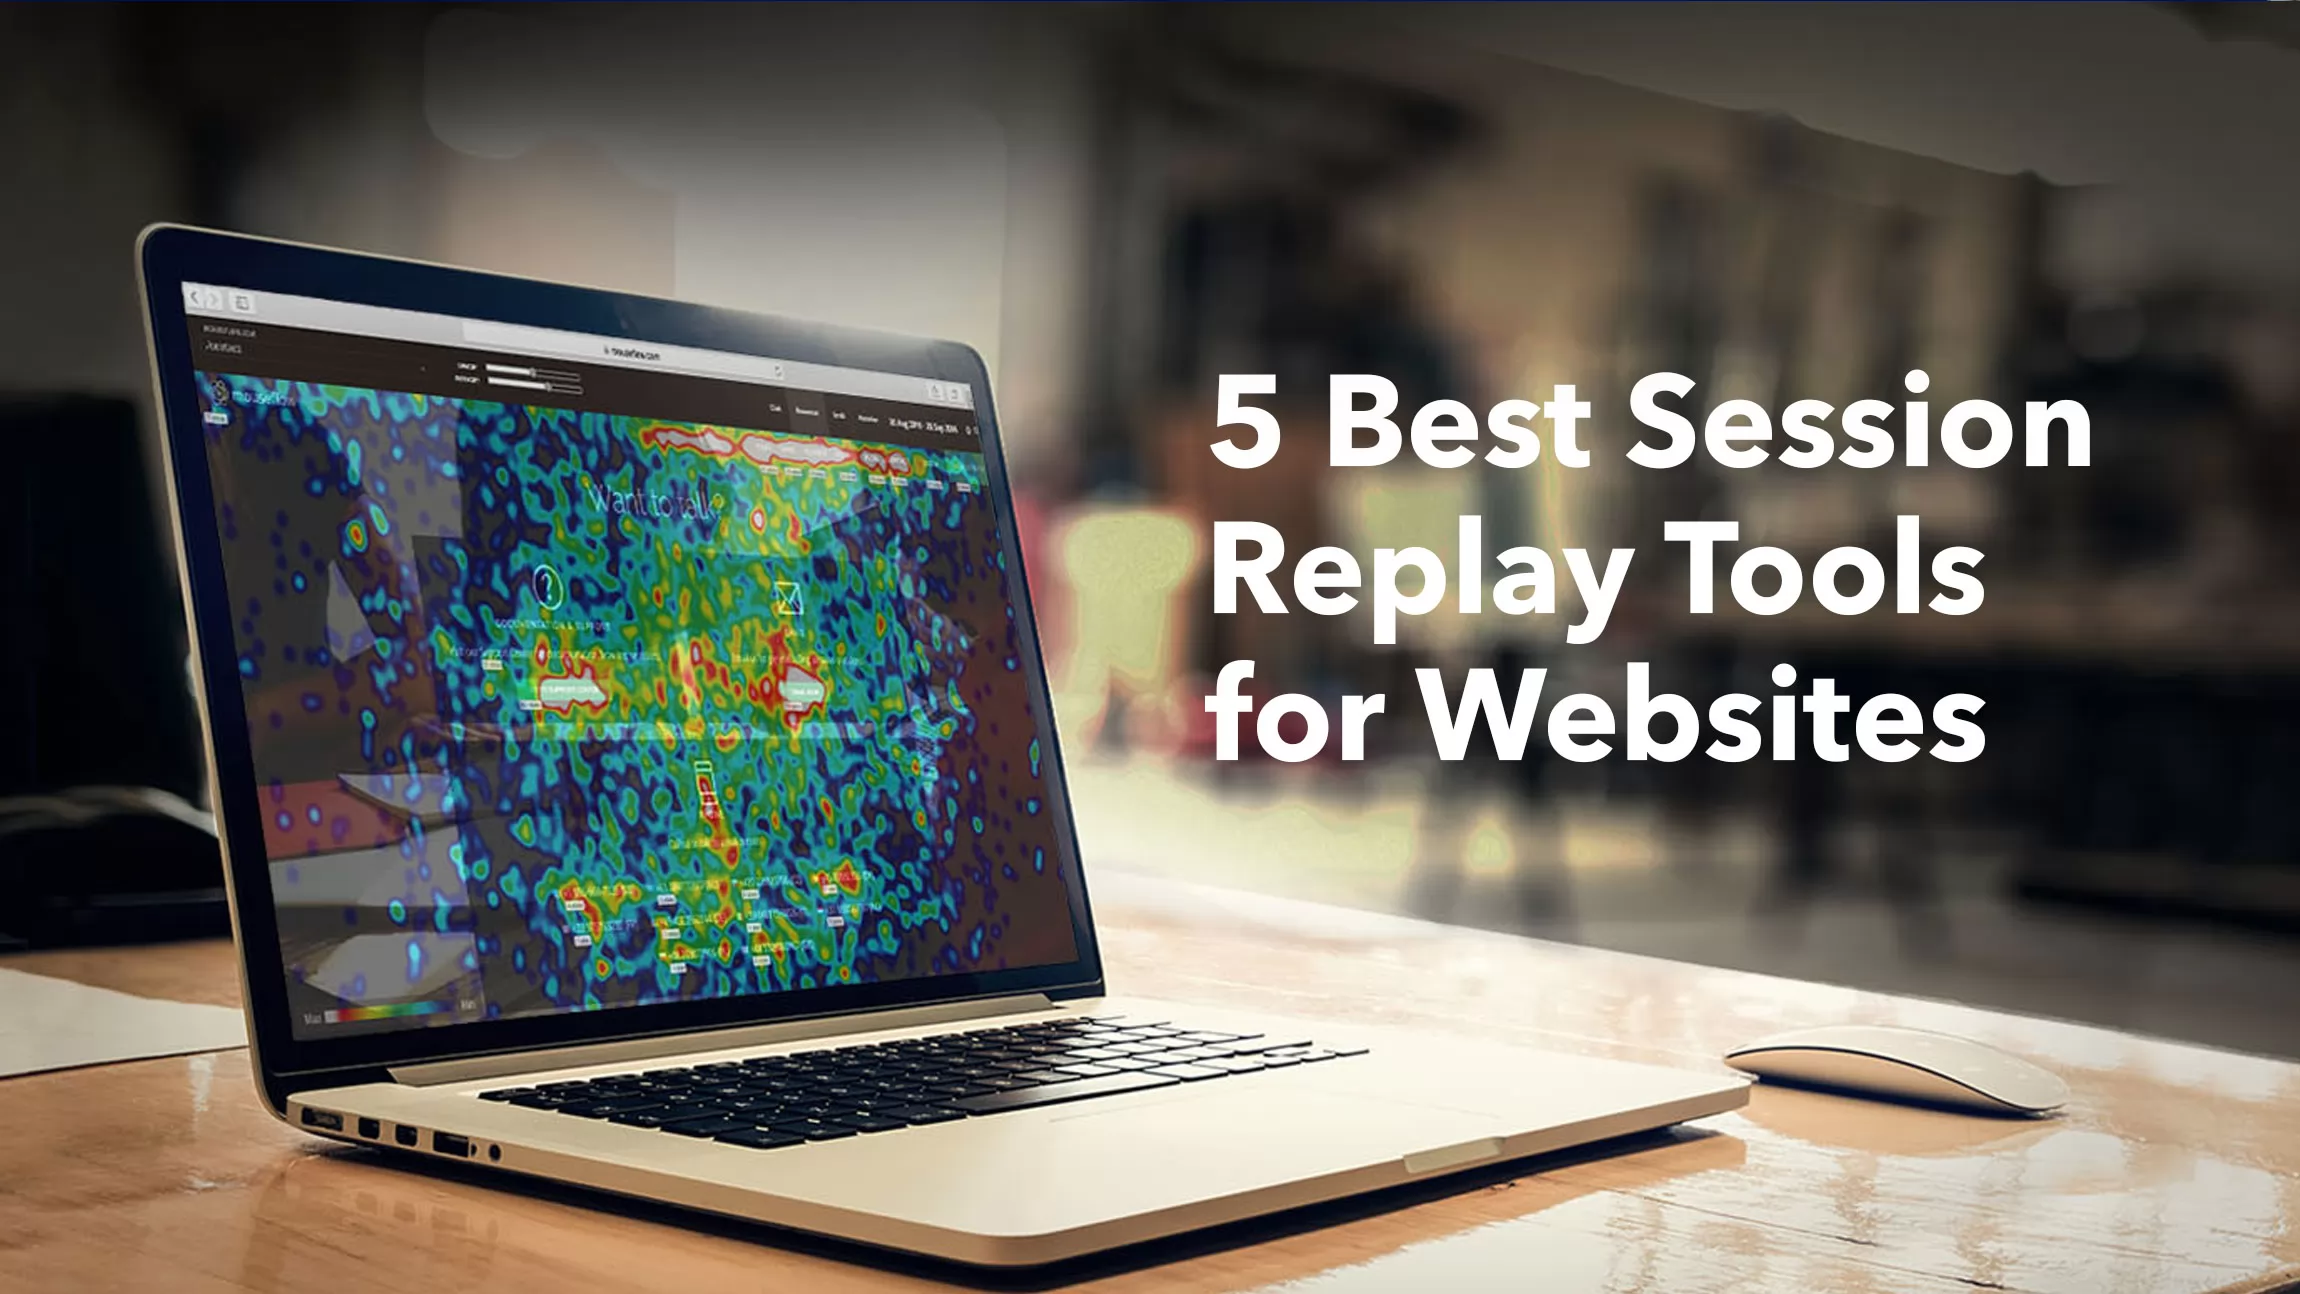 5 Best Session Replay Tools for Websites